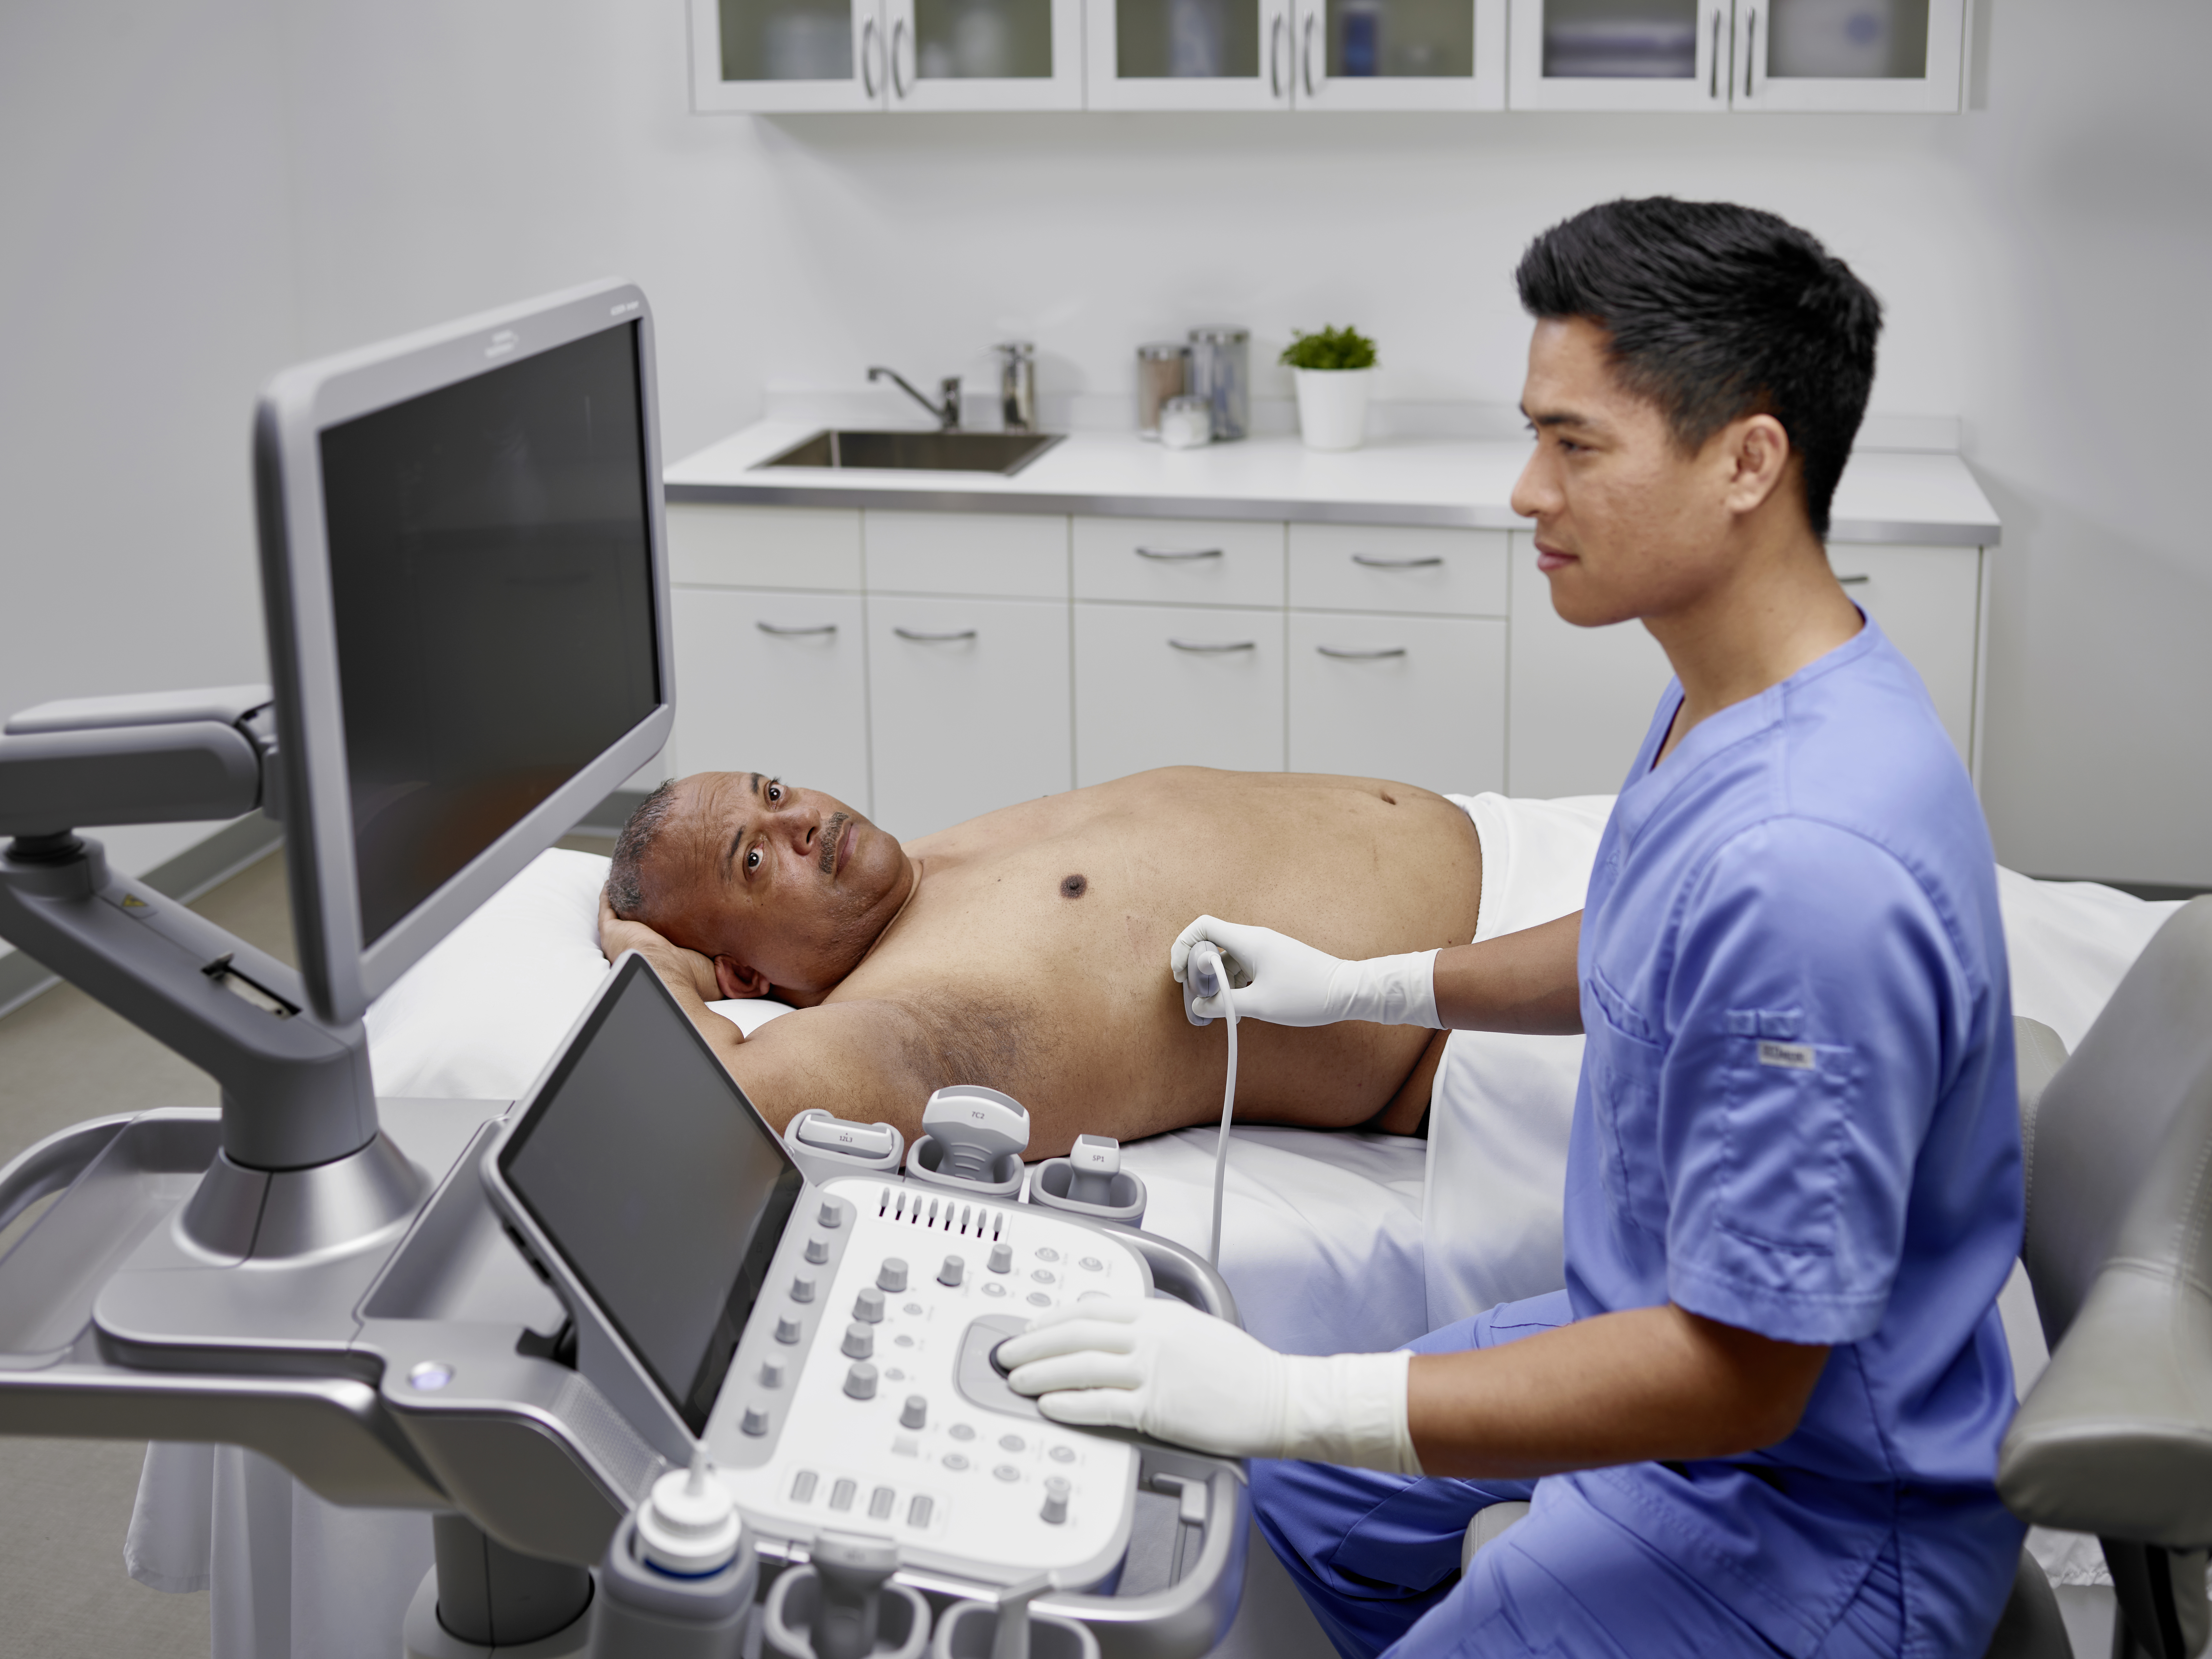 Featured image for 'Sonographer approved': the ACUSON Juniper Ultrasound System